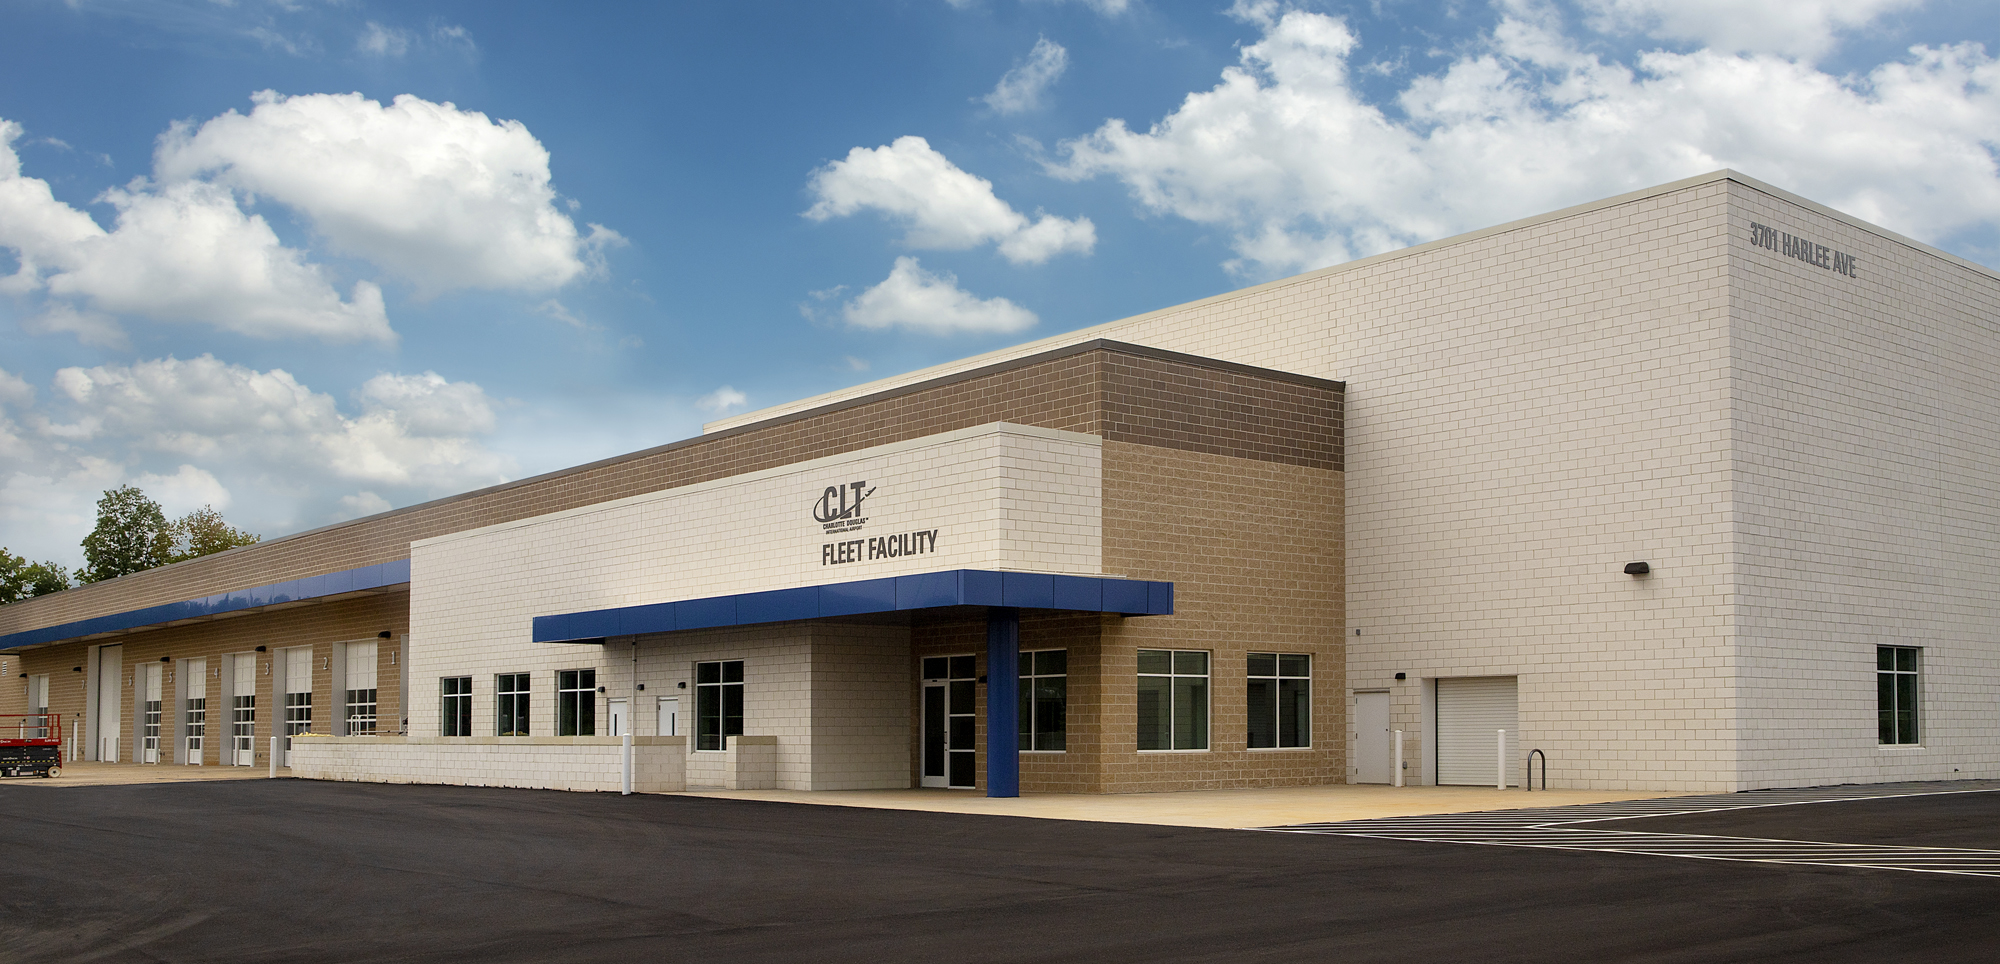 CLT Fleet Facility in Charlotte, NC featuring Prestige Masonry Architectural Block Smooth Face in Ivory Coast and Braxton Beige; Split Face in Luminous Sea Salt; and Johnson Concrete Products Lightweight Gray ProBlock